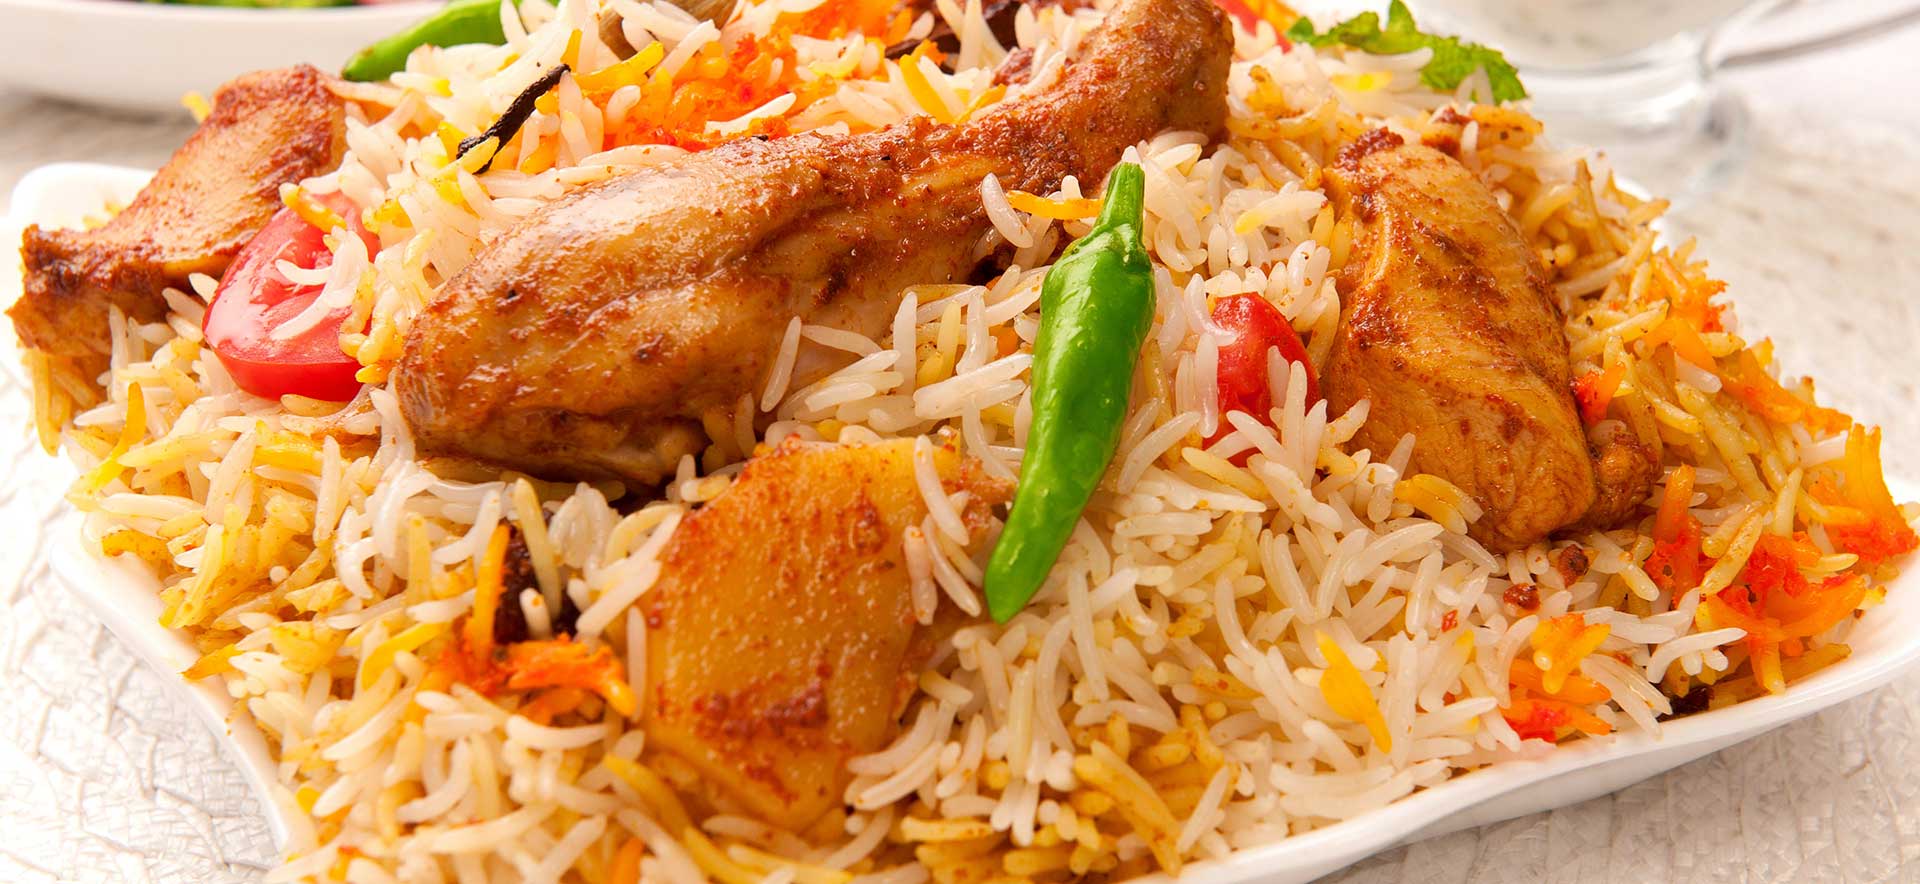 Local Indian Food Restaurants Near Me | Local Indian Food Delivery